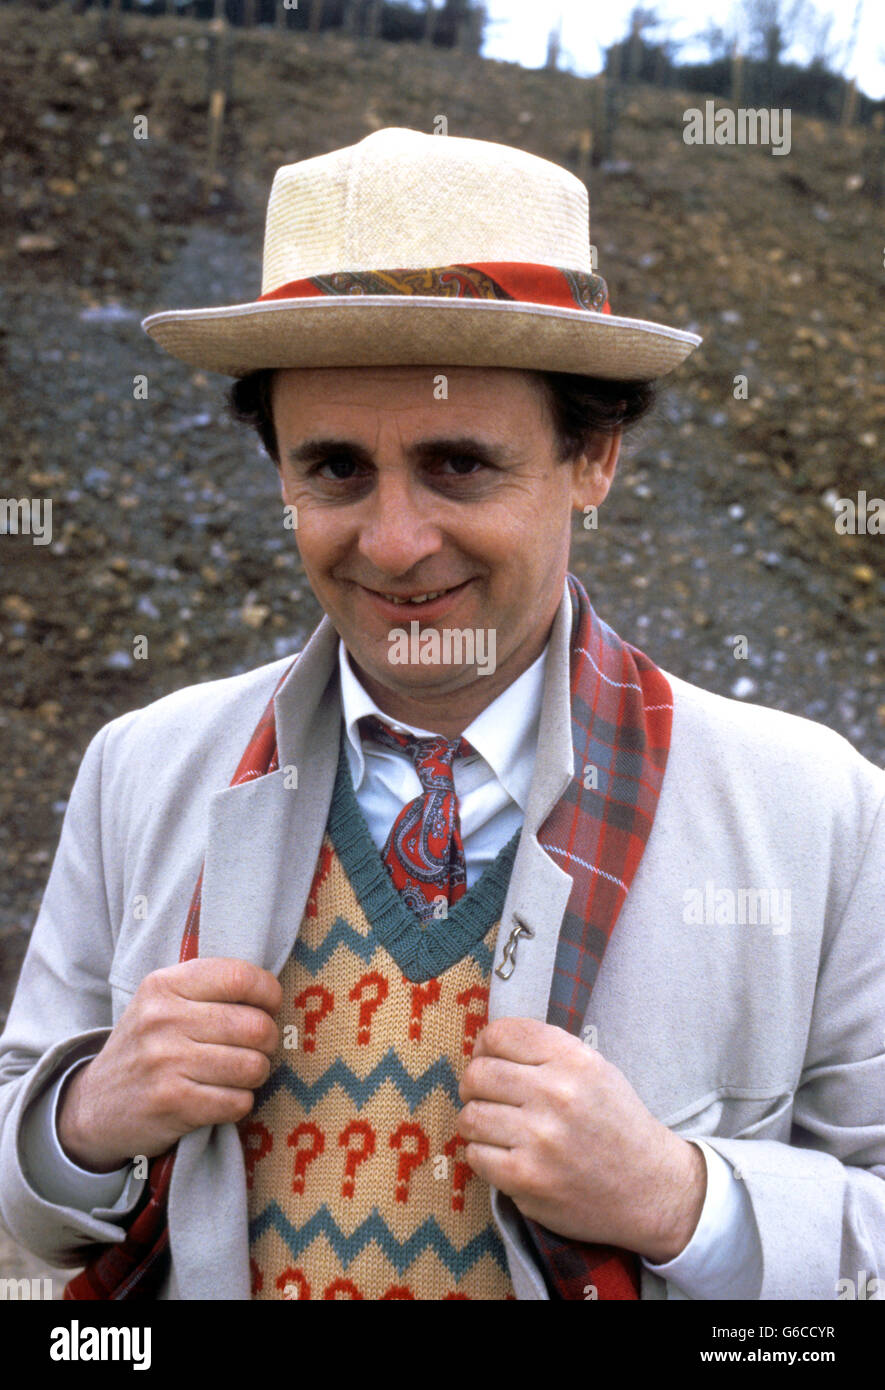 Television - BBC - Doctor Who - Somerset. Actor Sylvester McCoy as Doctor Who, on location at Cloford Quarry near Frome in Somerset. Stock Photo